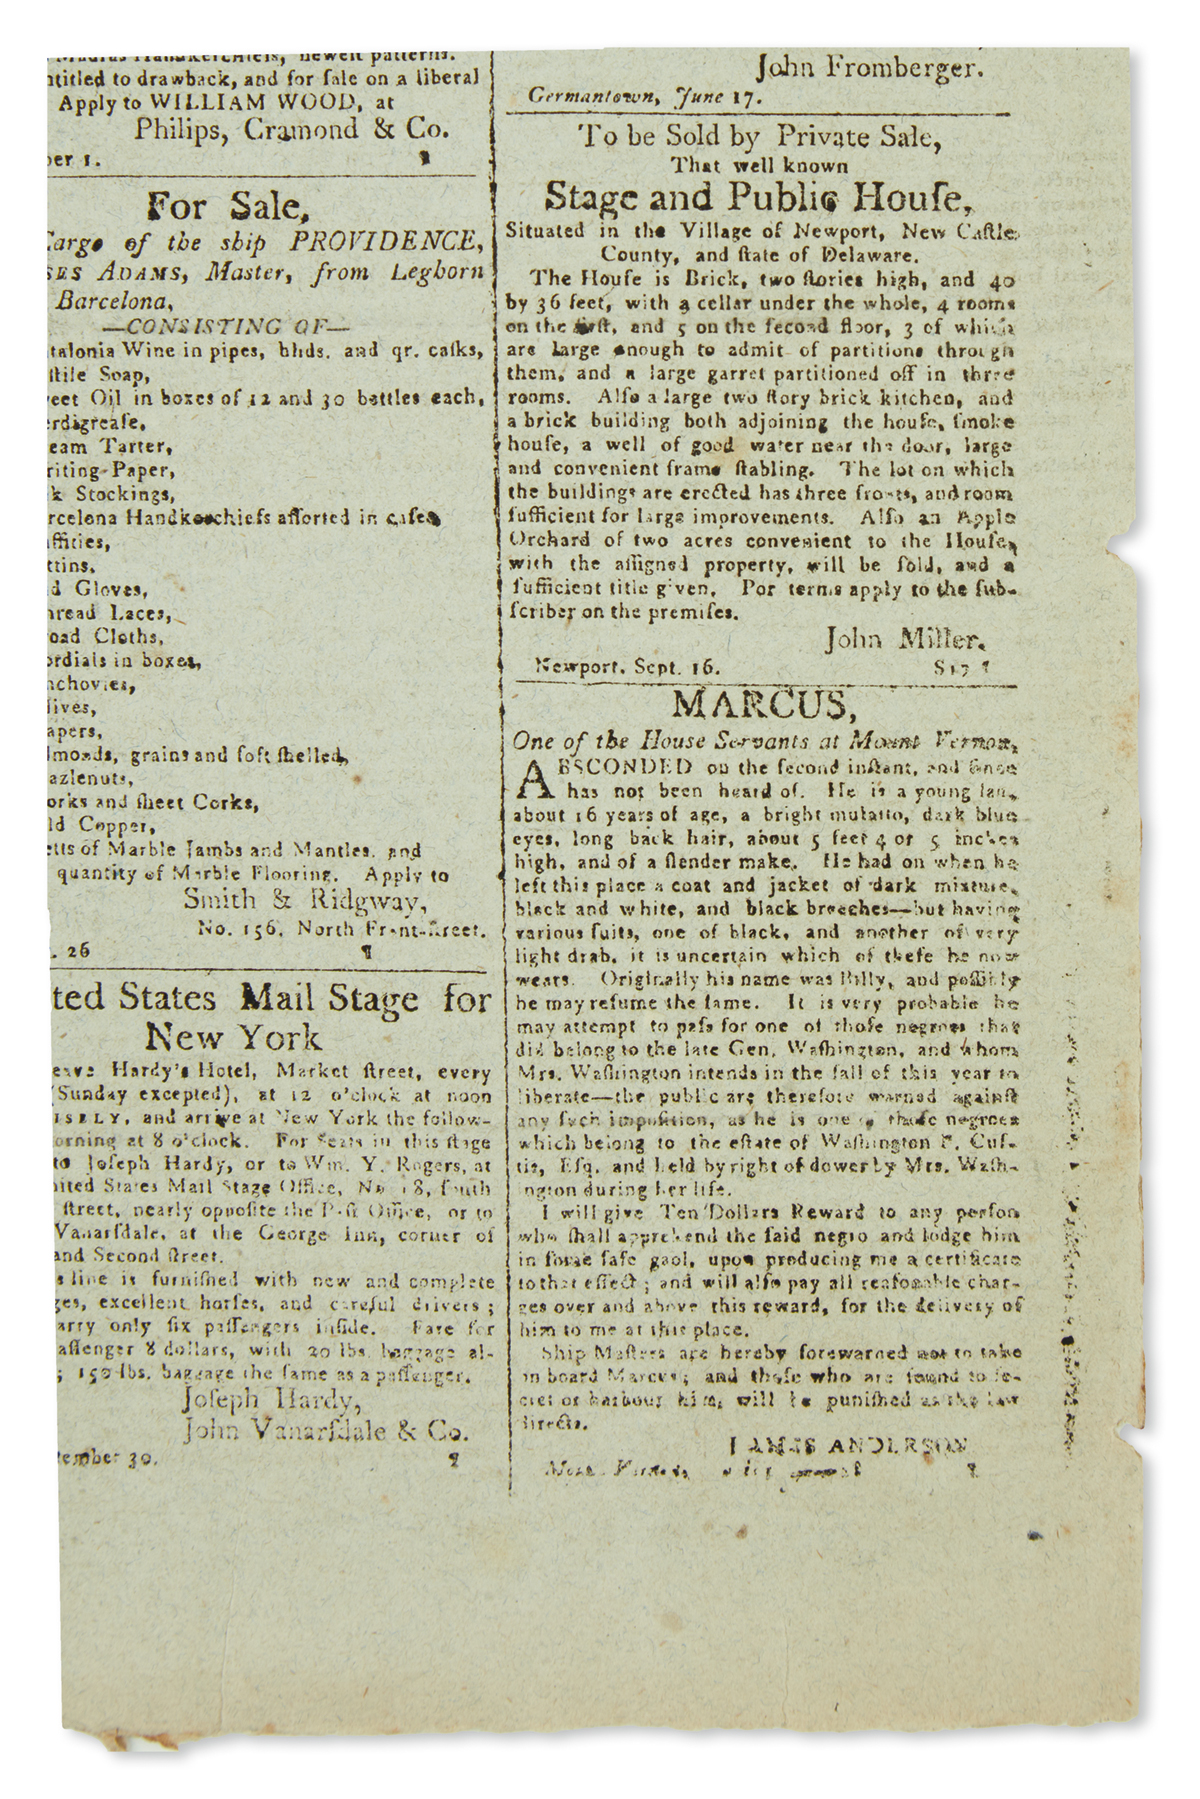 (SLAVERY AND ABOLITION.) Runaway advertisement for Marcus, one of the House Servants at Mount Vernon,